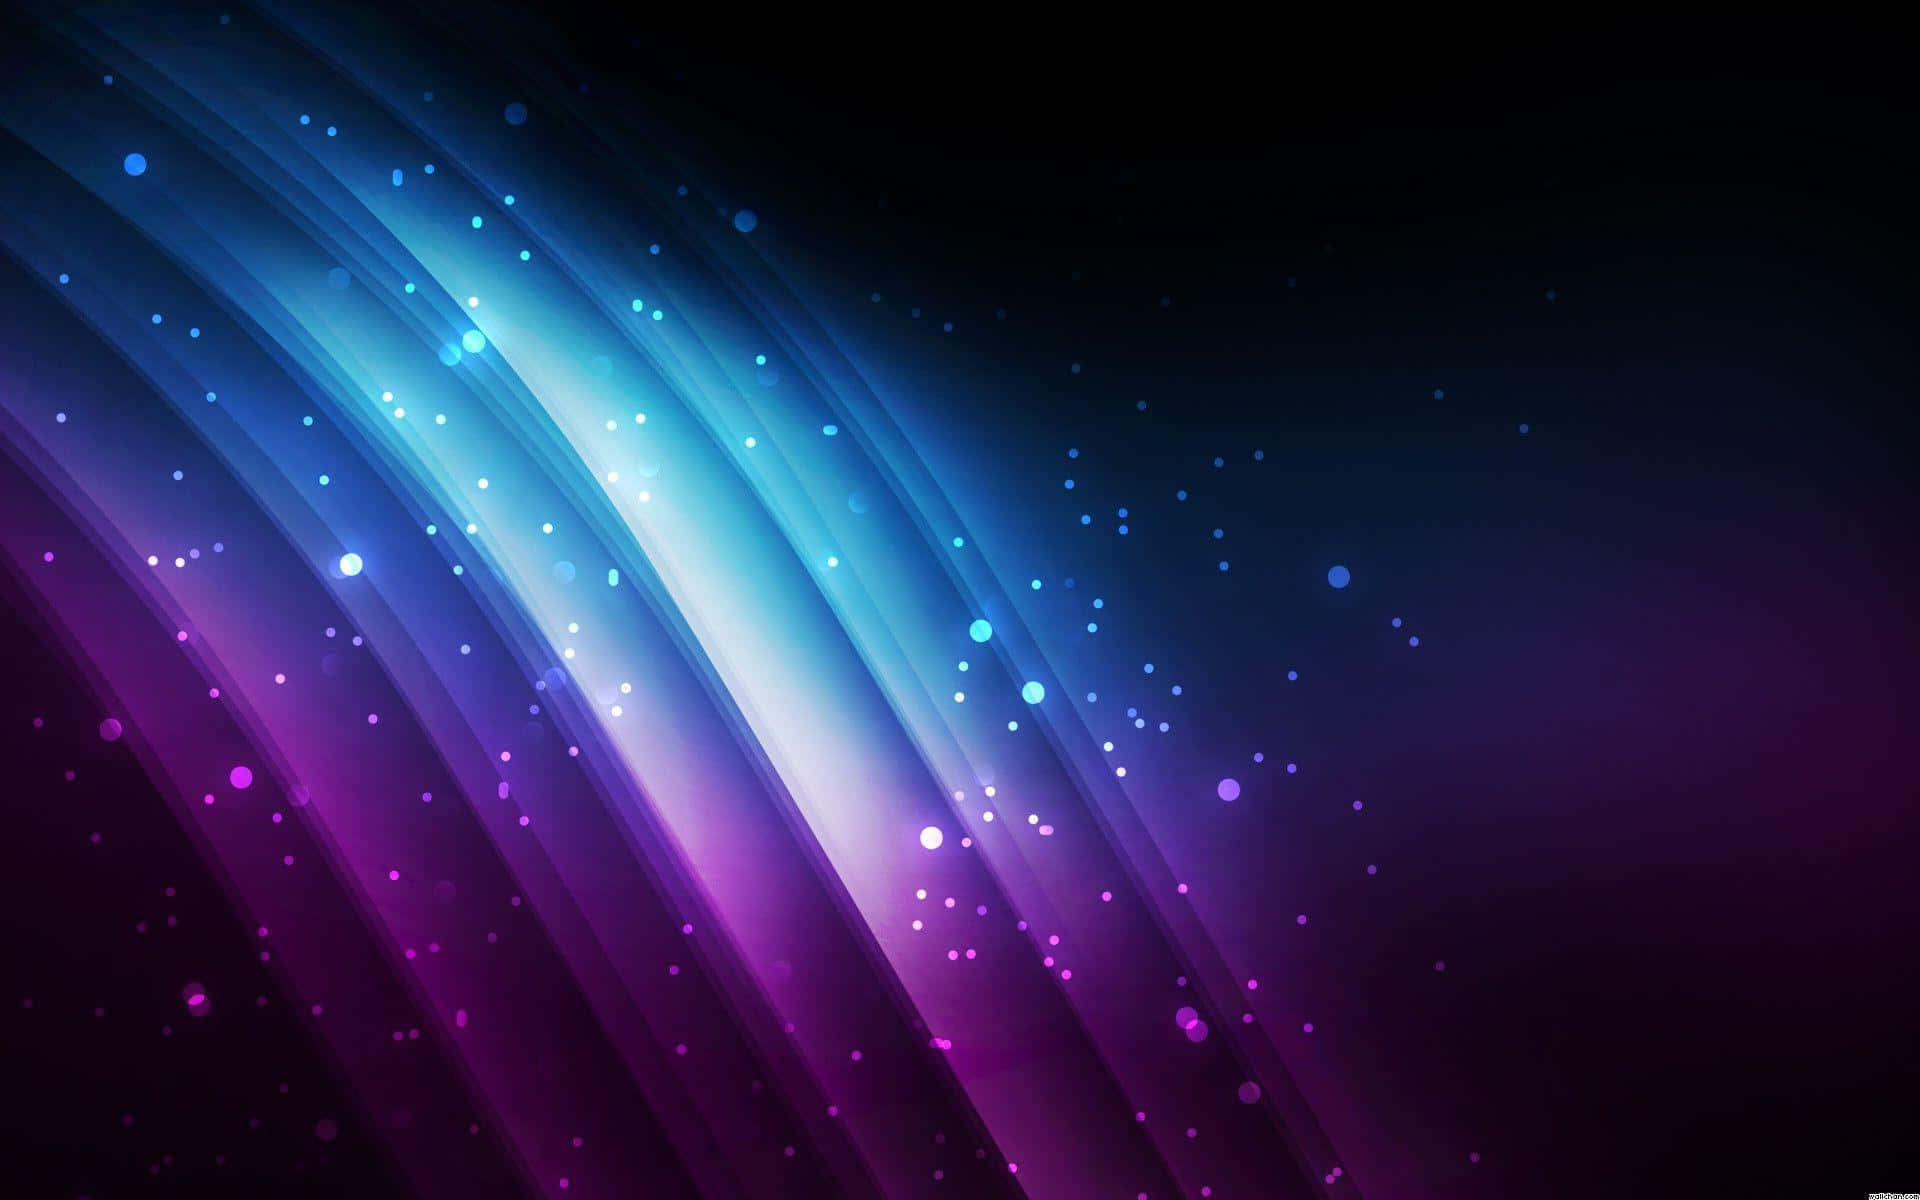 A desktop setup in bright cool blue and purple hues Wallpaper